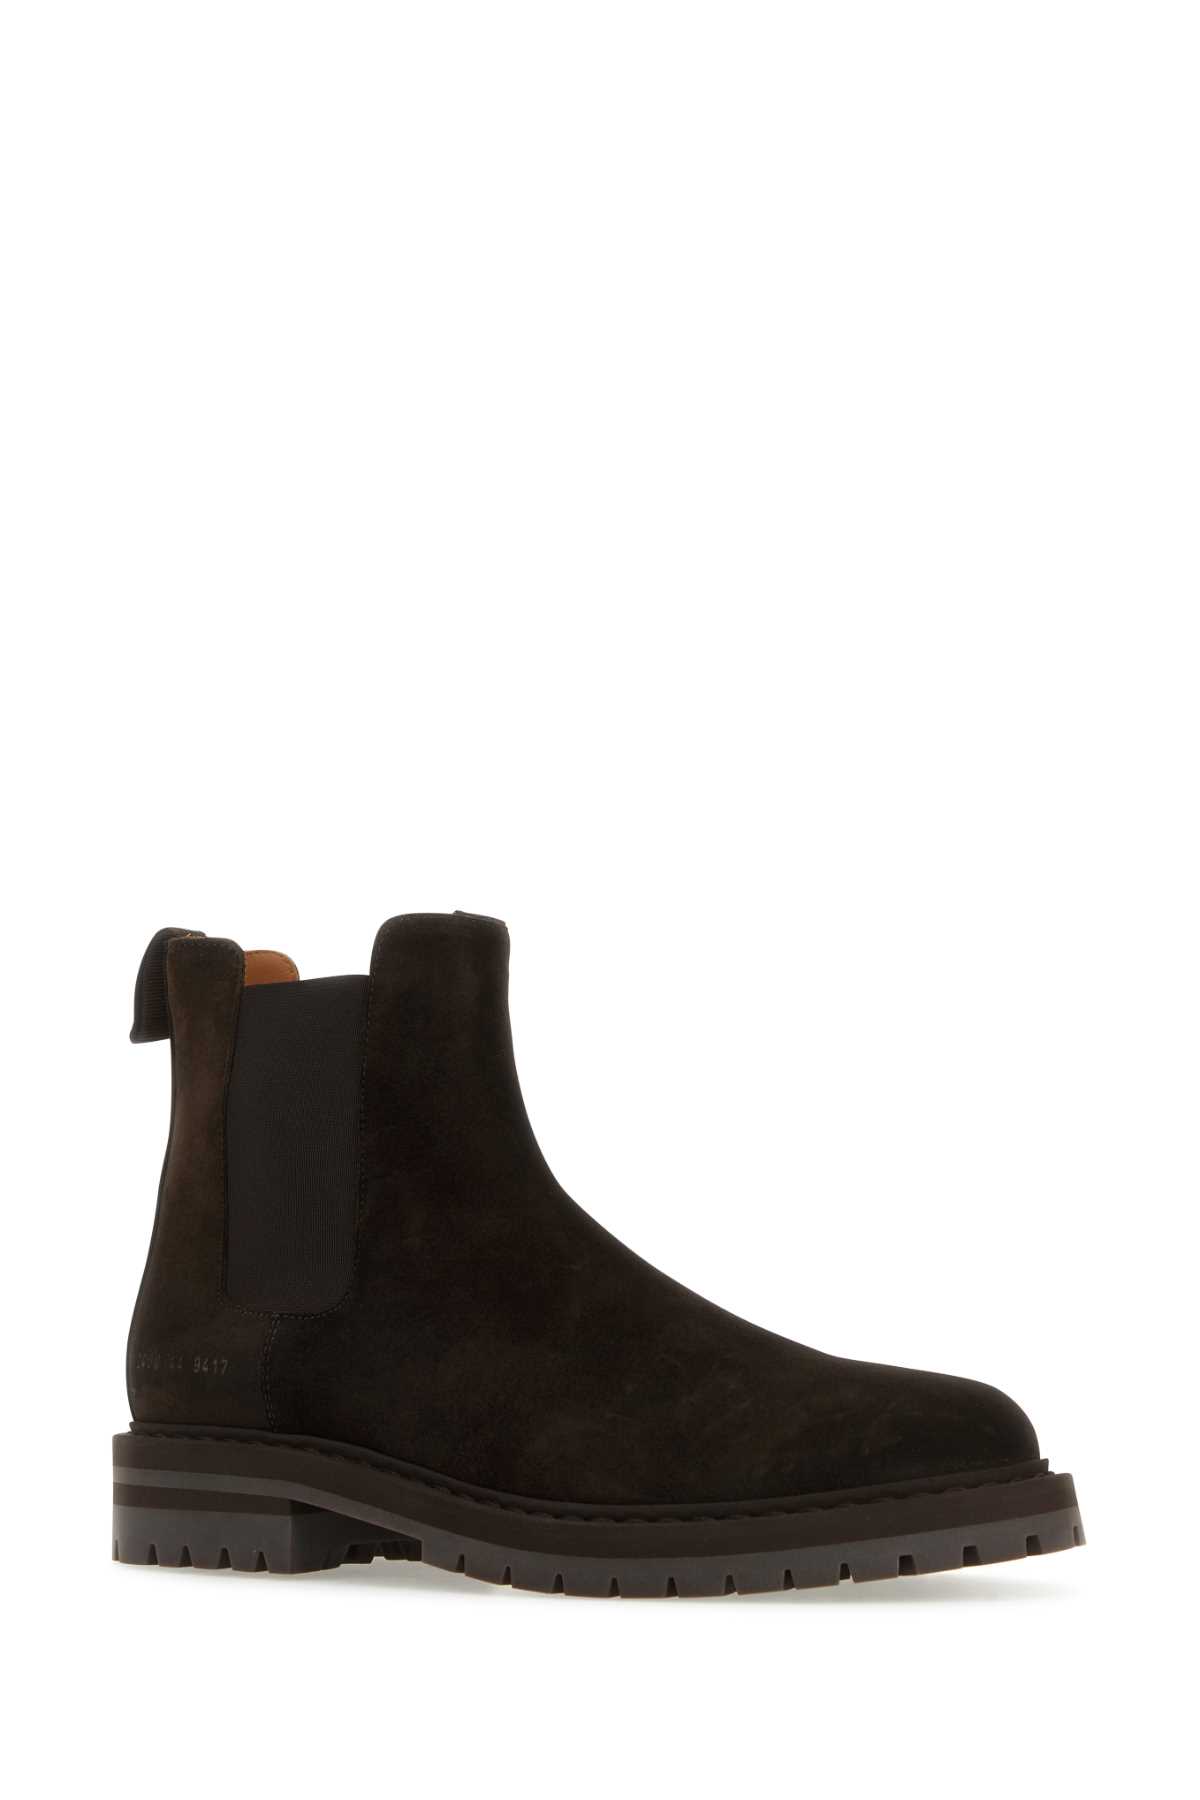 Shop Common Projects Dark Brown Suede Ankle Boots In Darkbrown